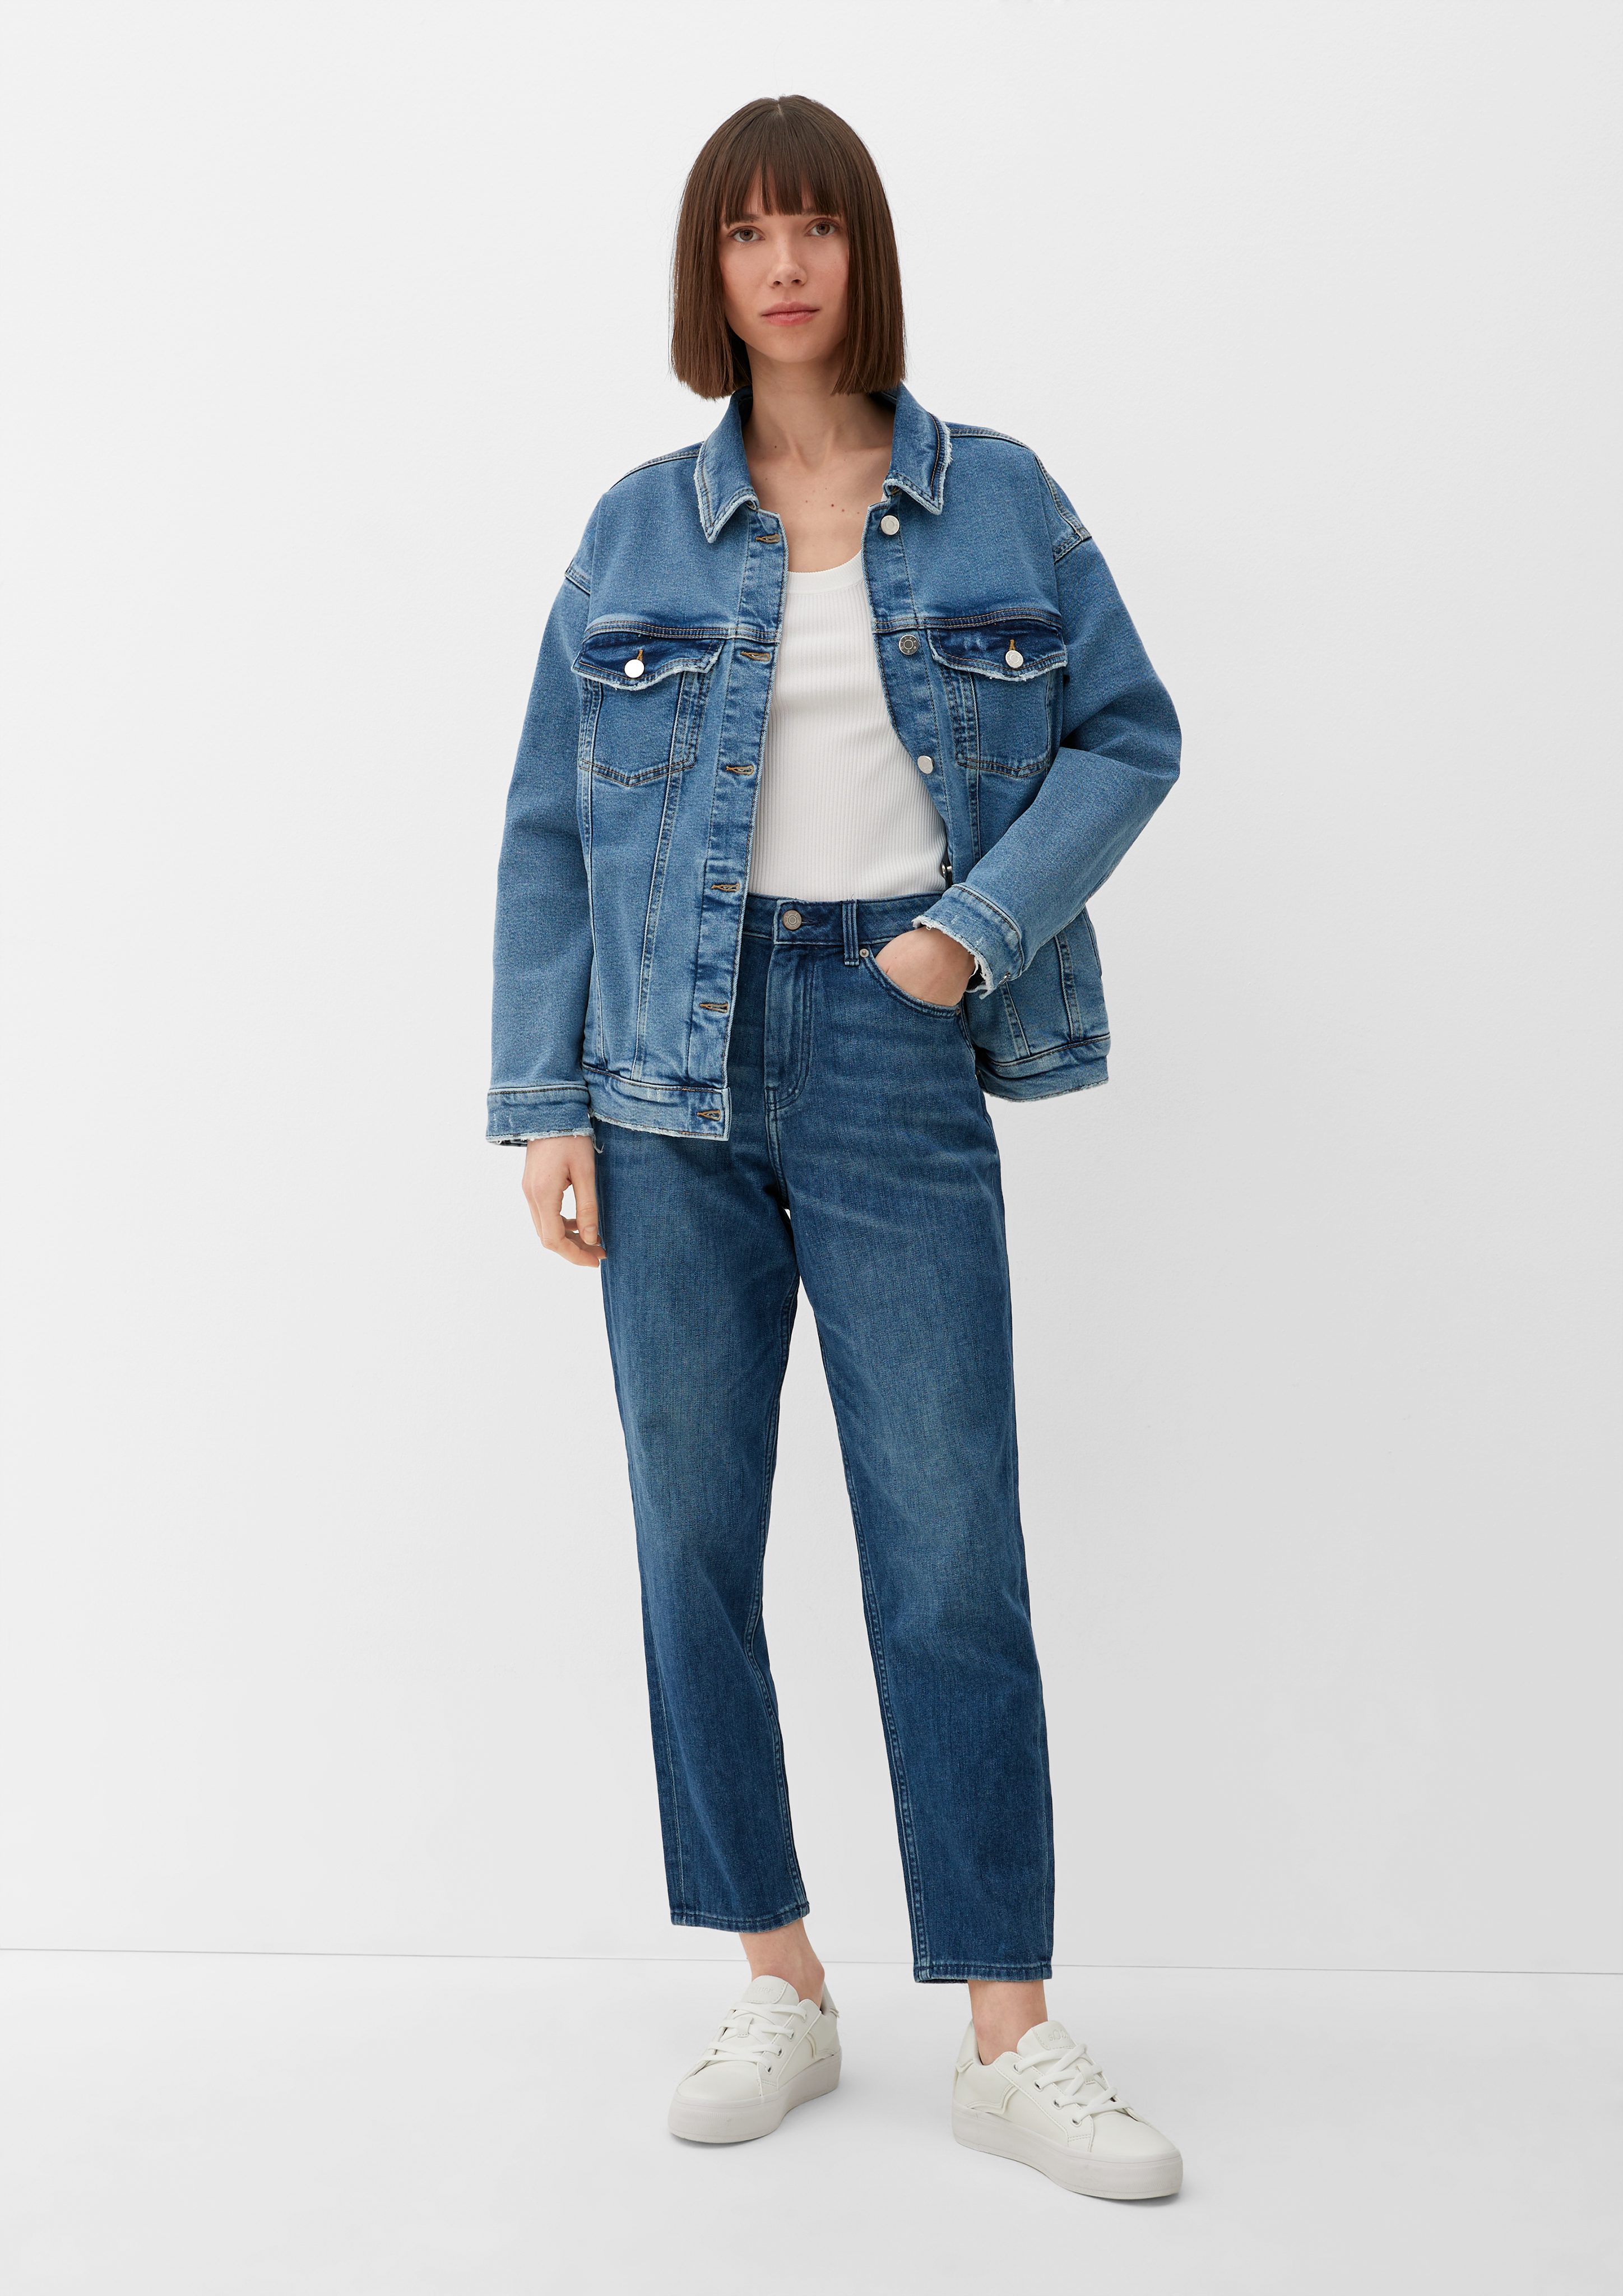 s.Oliver 7/8-Jeans Regular: Jeans im Mom-Fit Label-Patch, Waschung